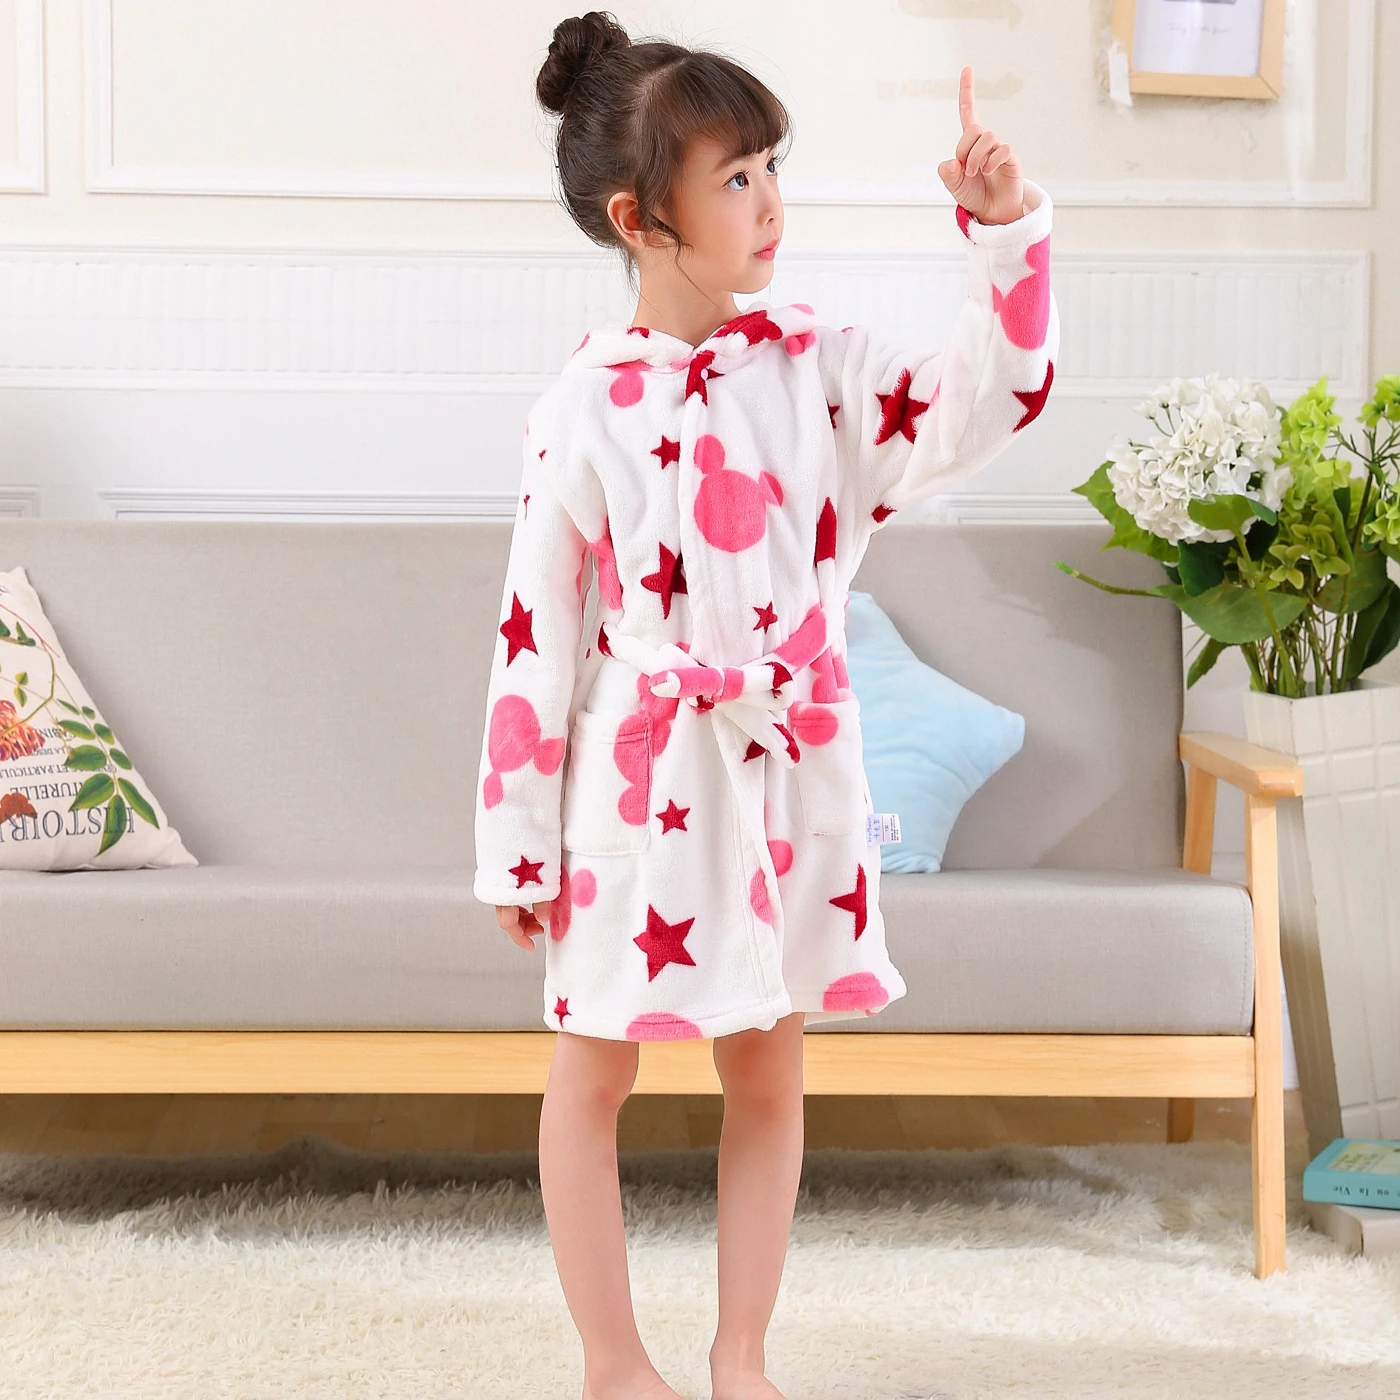 pajama sets couple	 Soft Kids Bathrobe Baby Hooded Sleepwear Children Bath Robes Girls Flannel Pijamas Boys Girl Nightgown Baby Clothes for 2-10Y cotton nightgowns